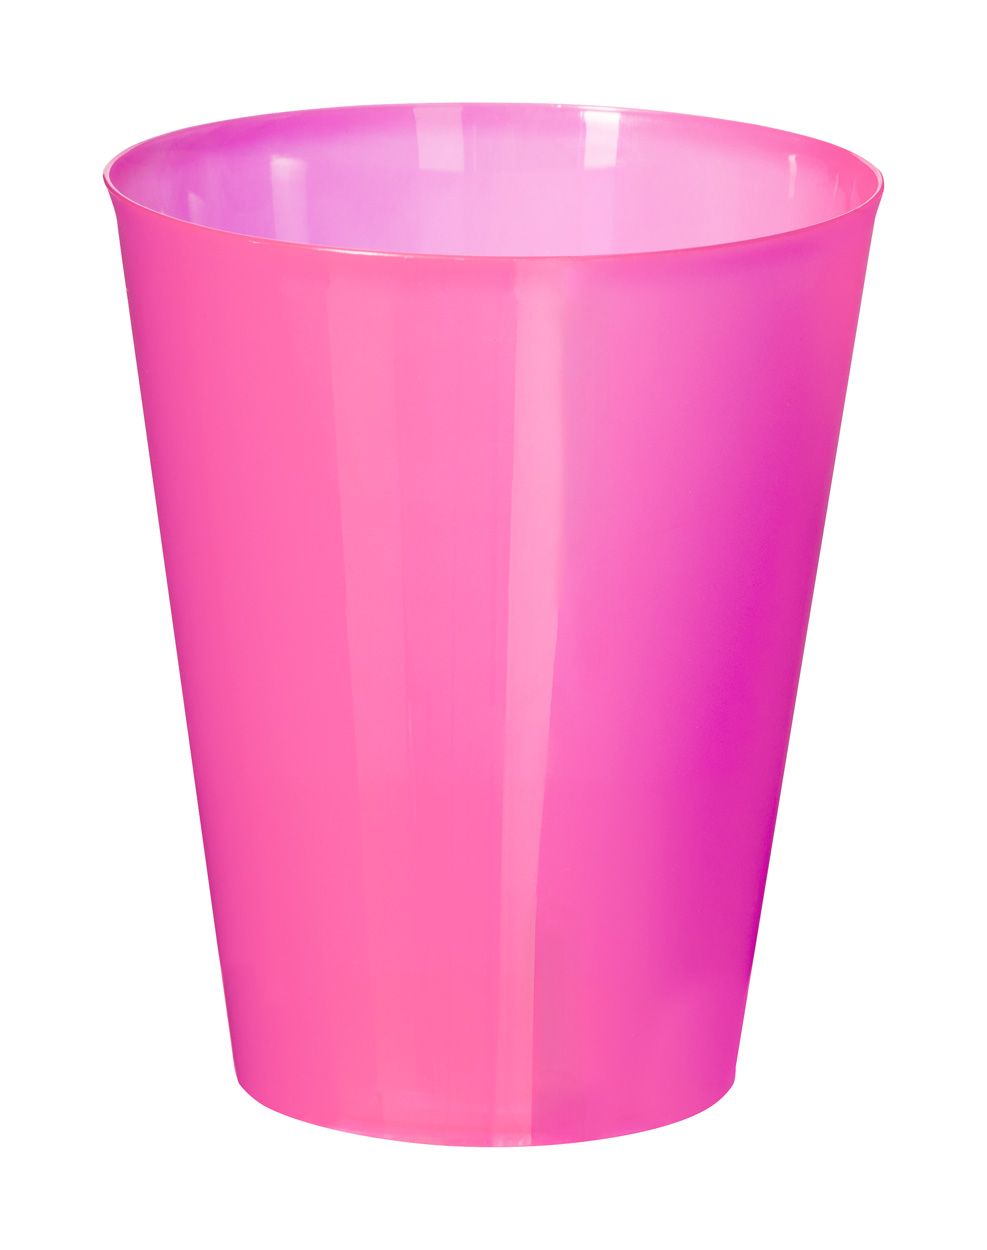 Colorbert reusable cup for events - pink